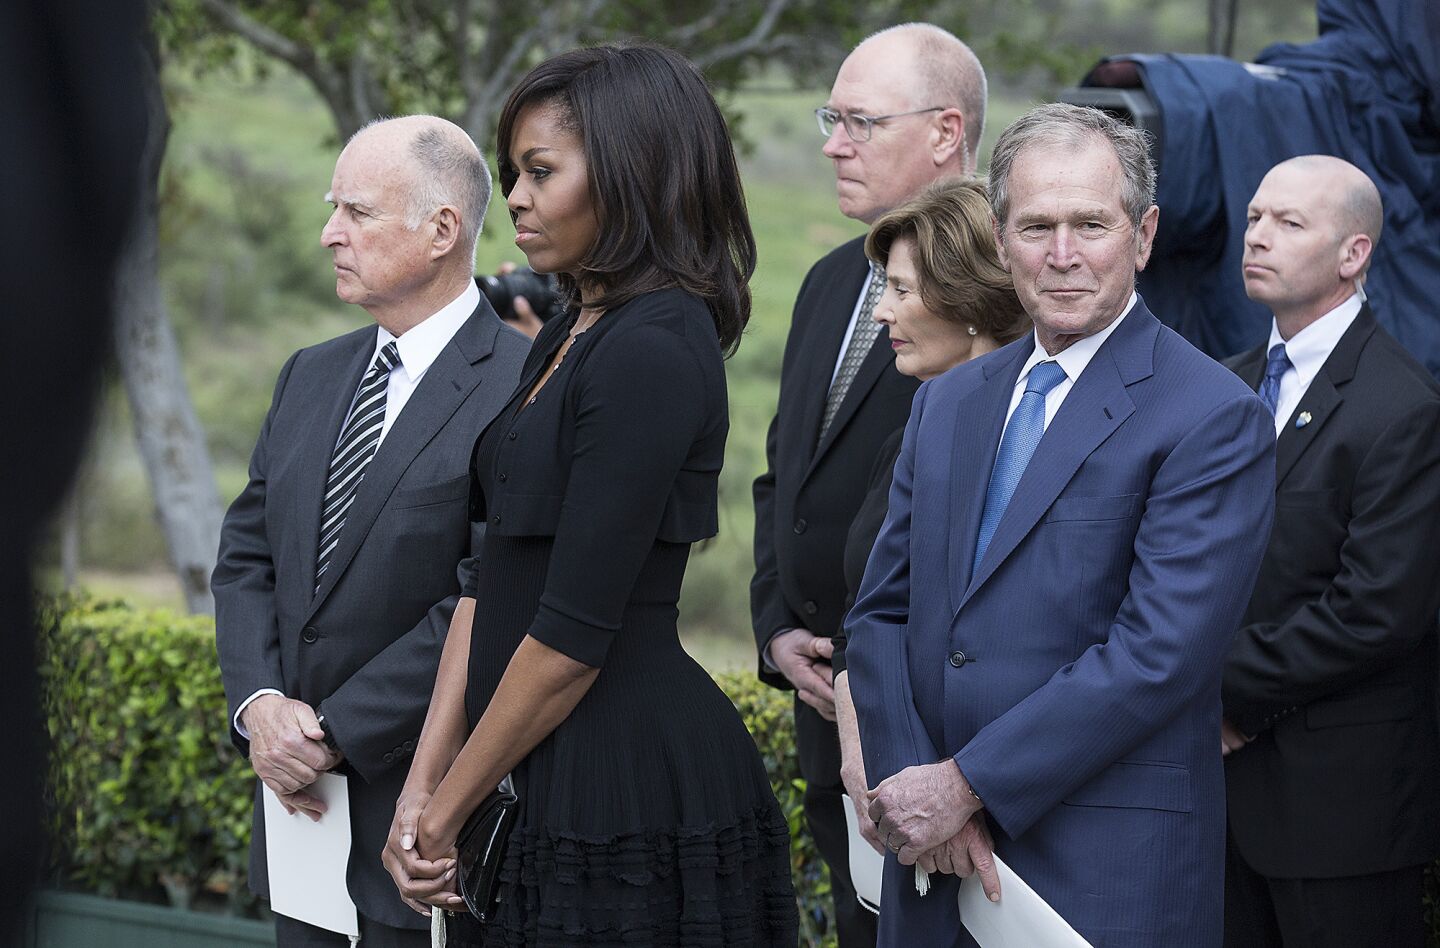 From left, California Gov. Jerry Brown, First Lady Michelle Obama, former First Lady Laura Bush and former President George W. Bush wait to pay their respects at Nancy Reagan's gravesite at the Ronald Reagan Presidential Library in Simi Valley.